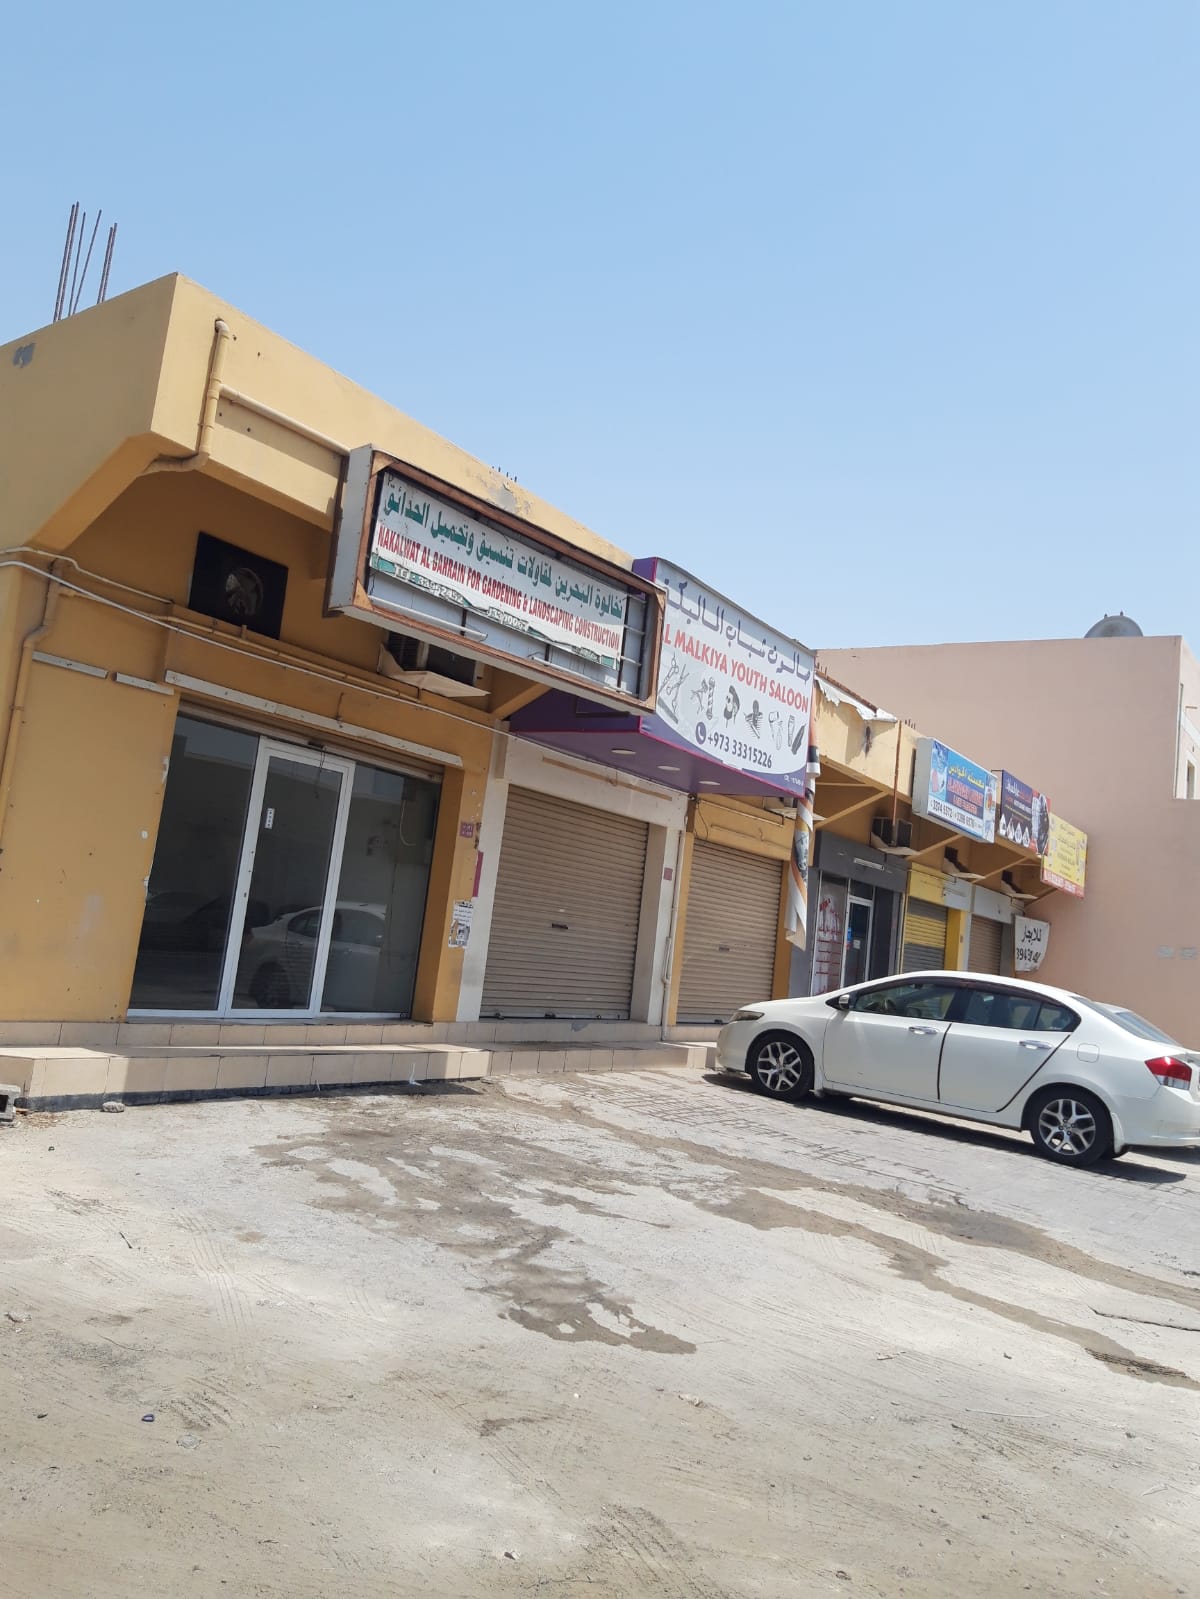 For Sale A Commercial Building In Al-Malikiyah